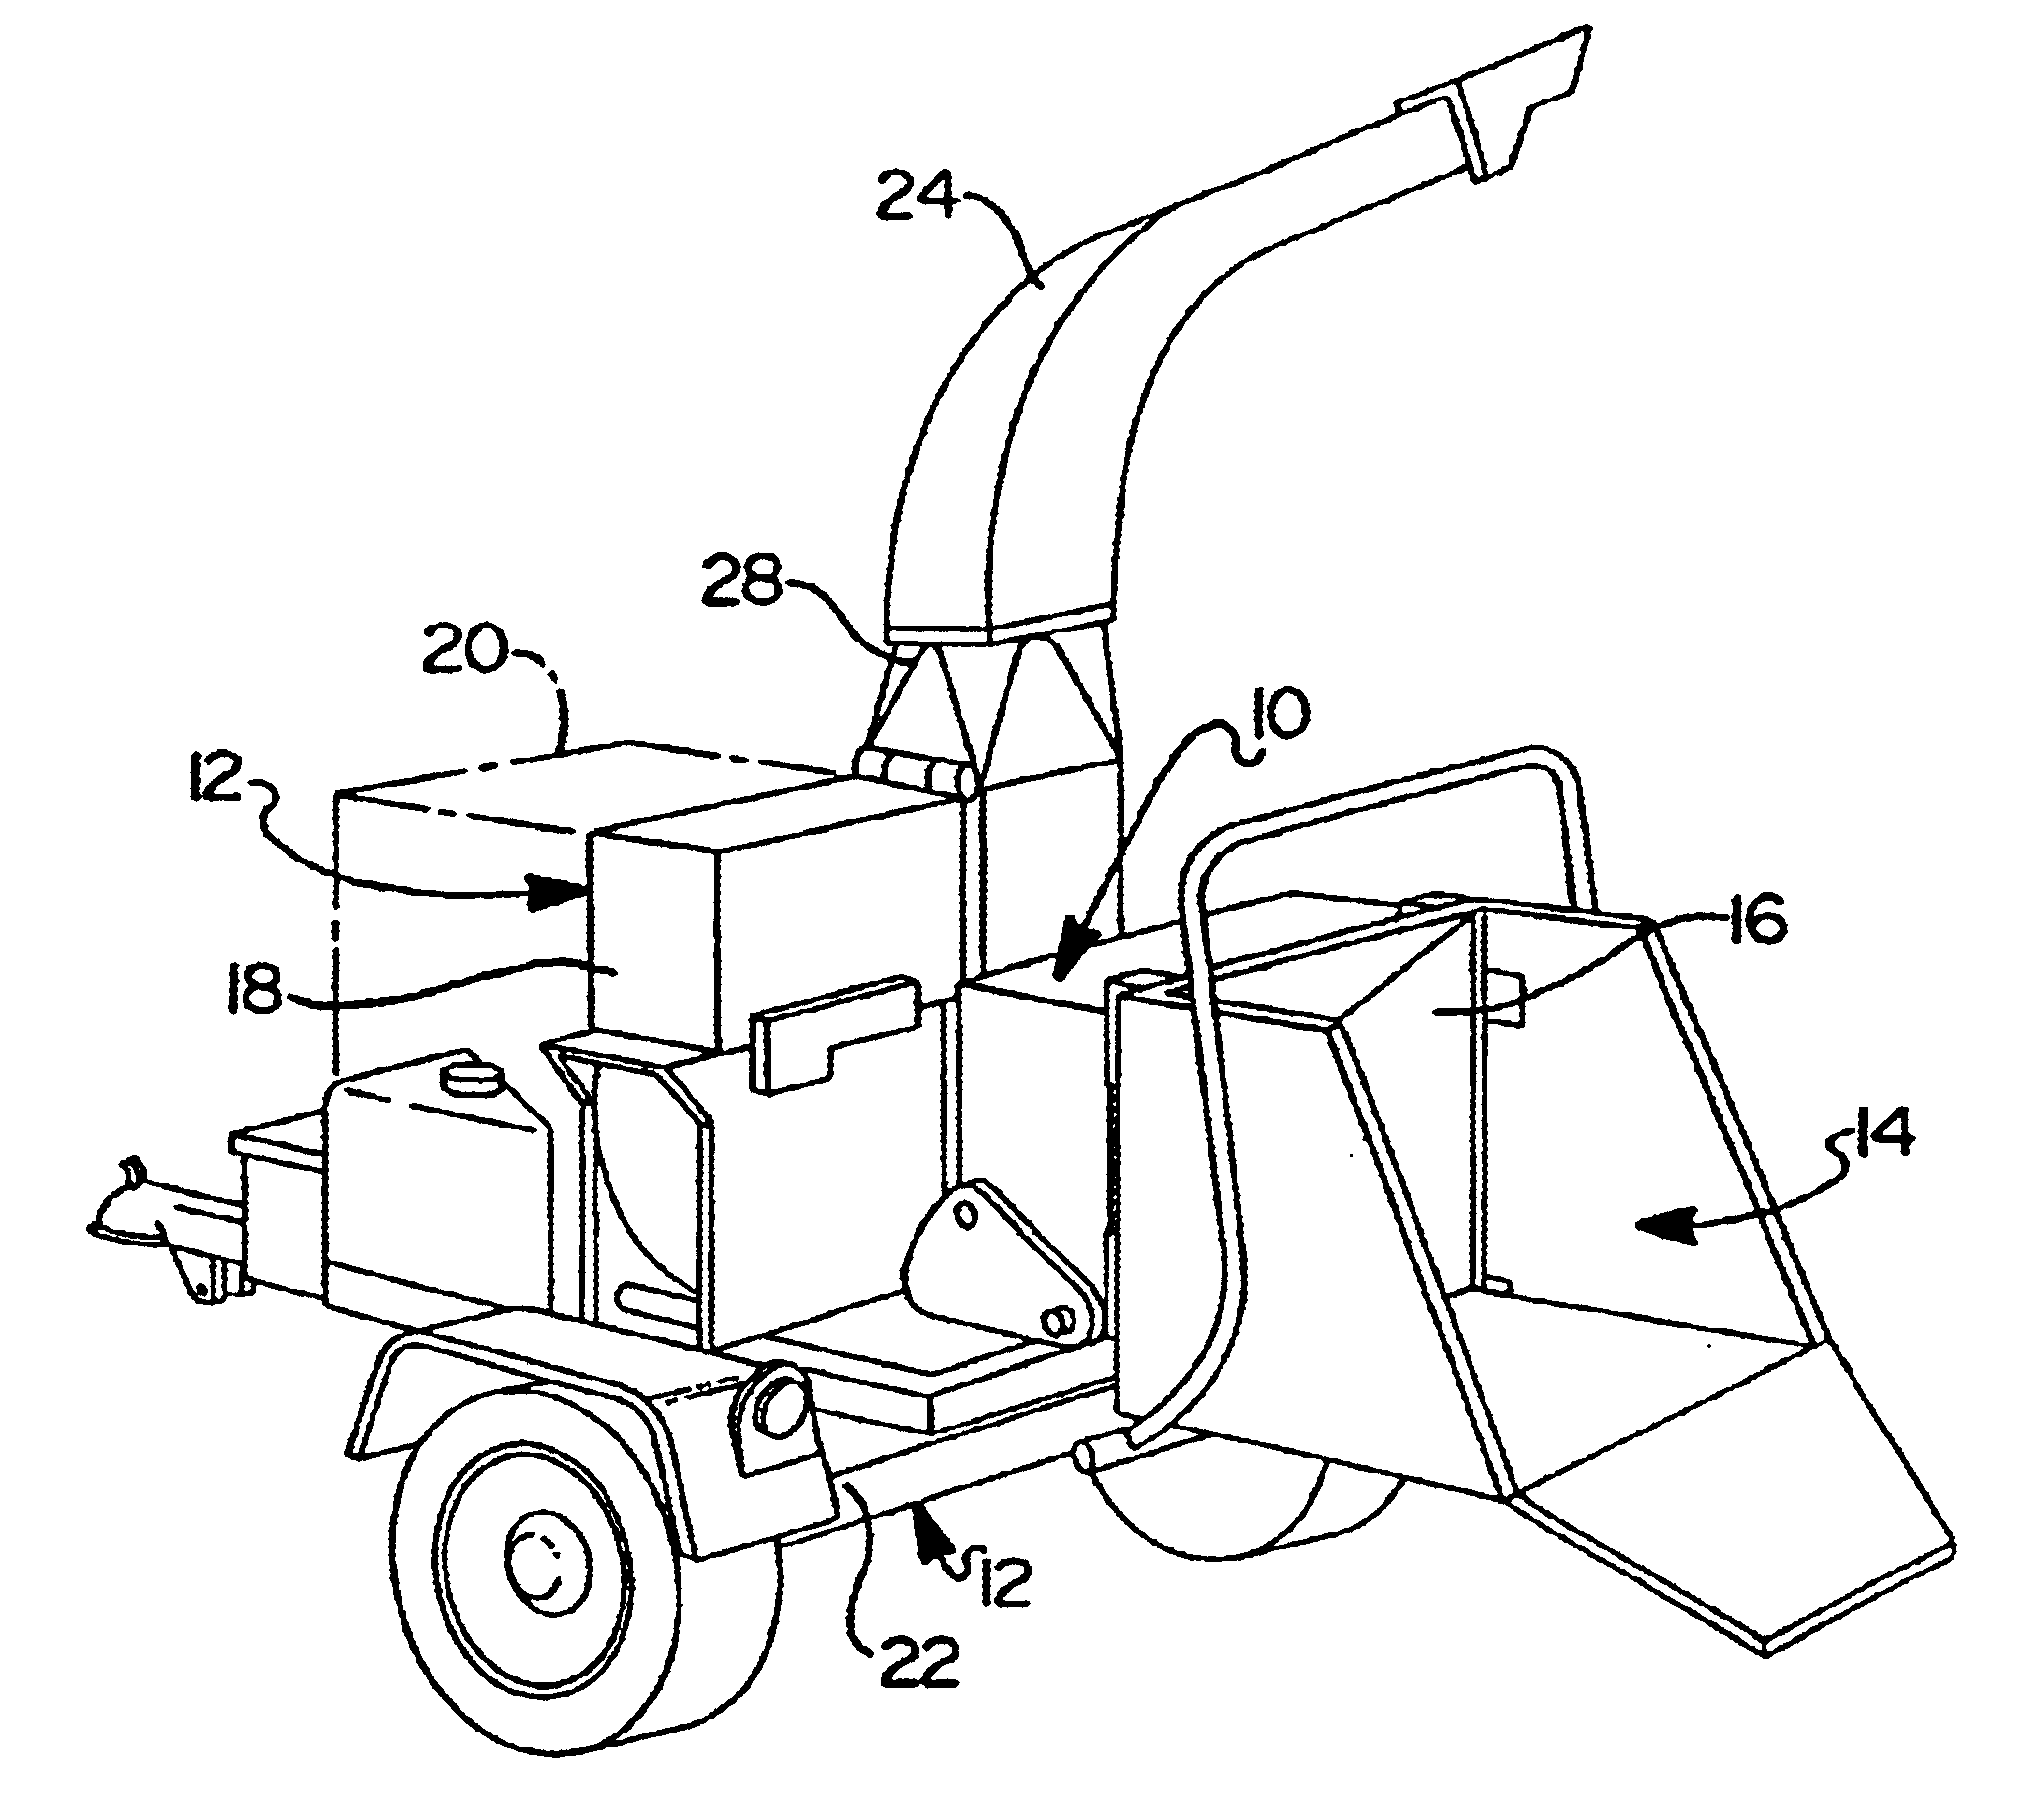 Reversing automatic feed wheel assembly for wood chipper